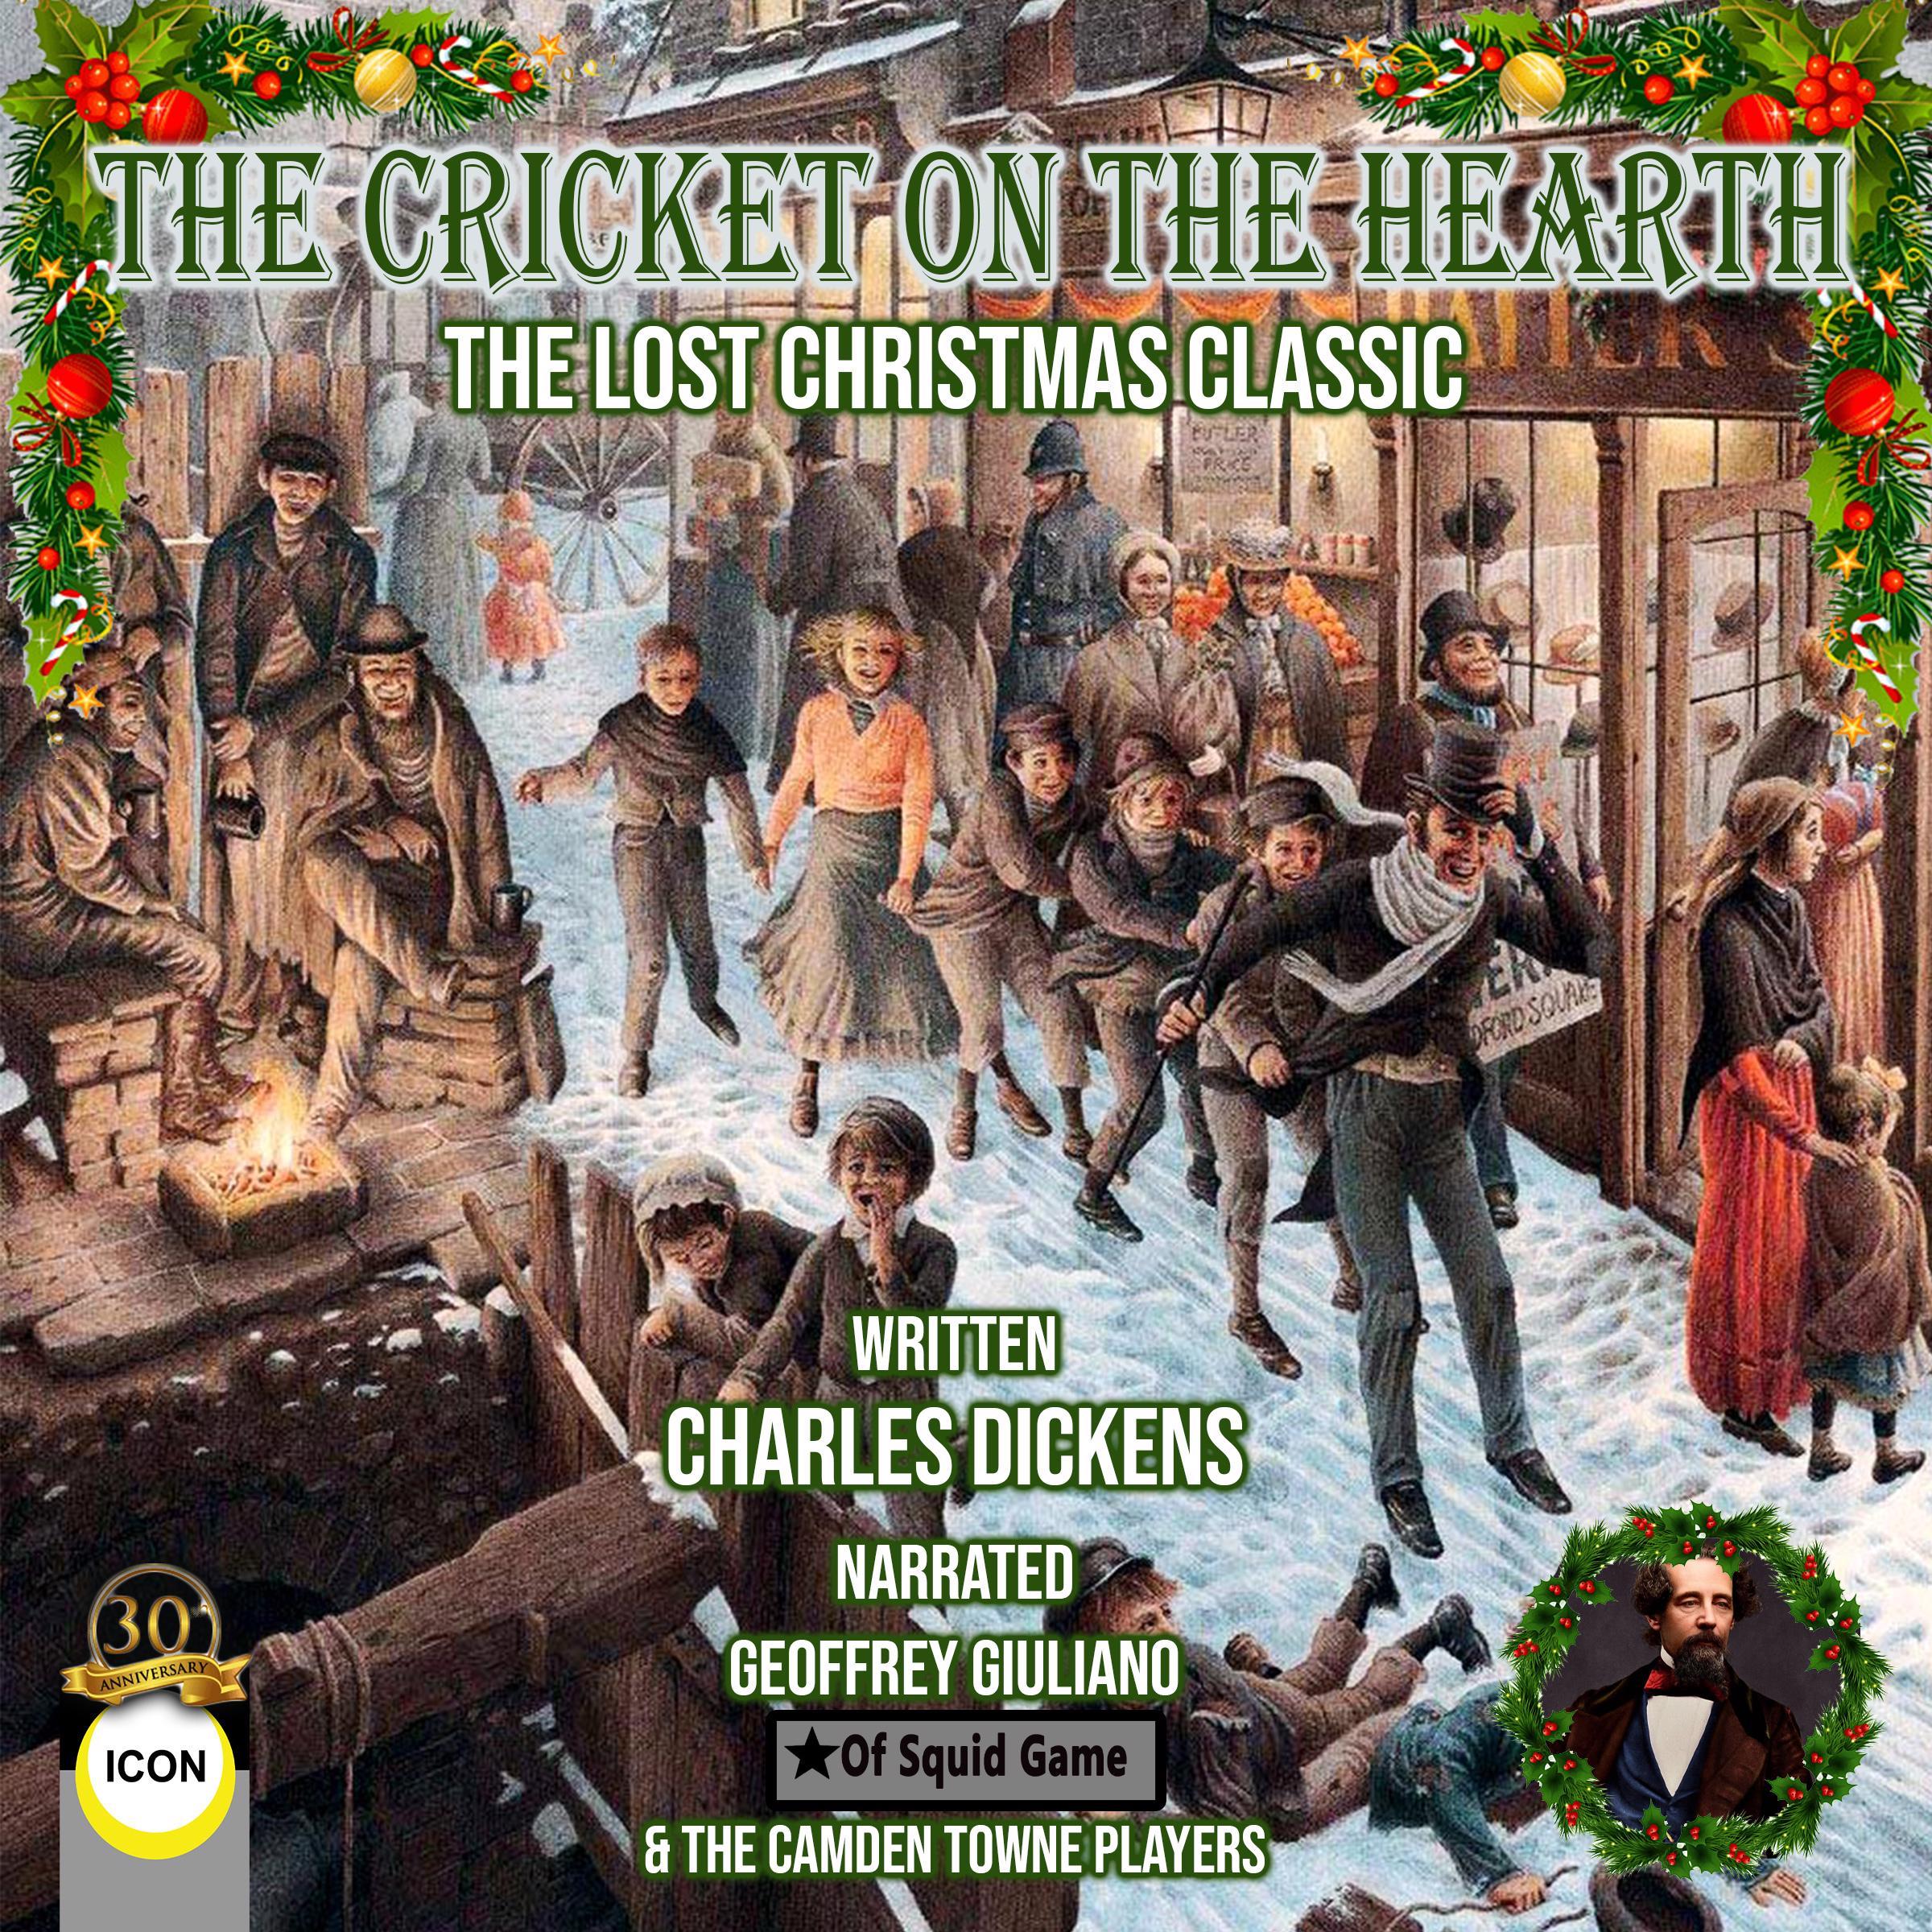 The Cricket on the Hearth The Lost Christmas Classic